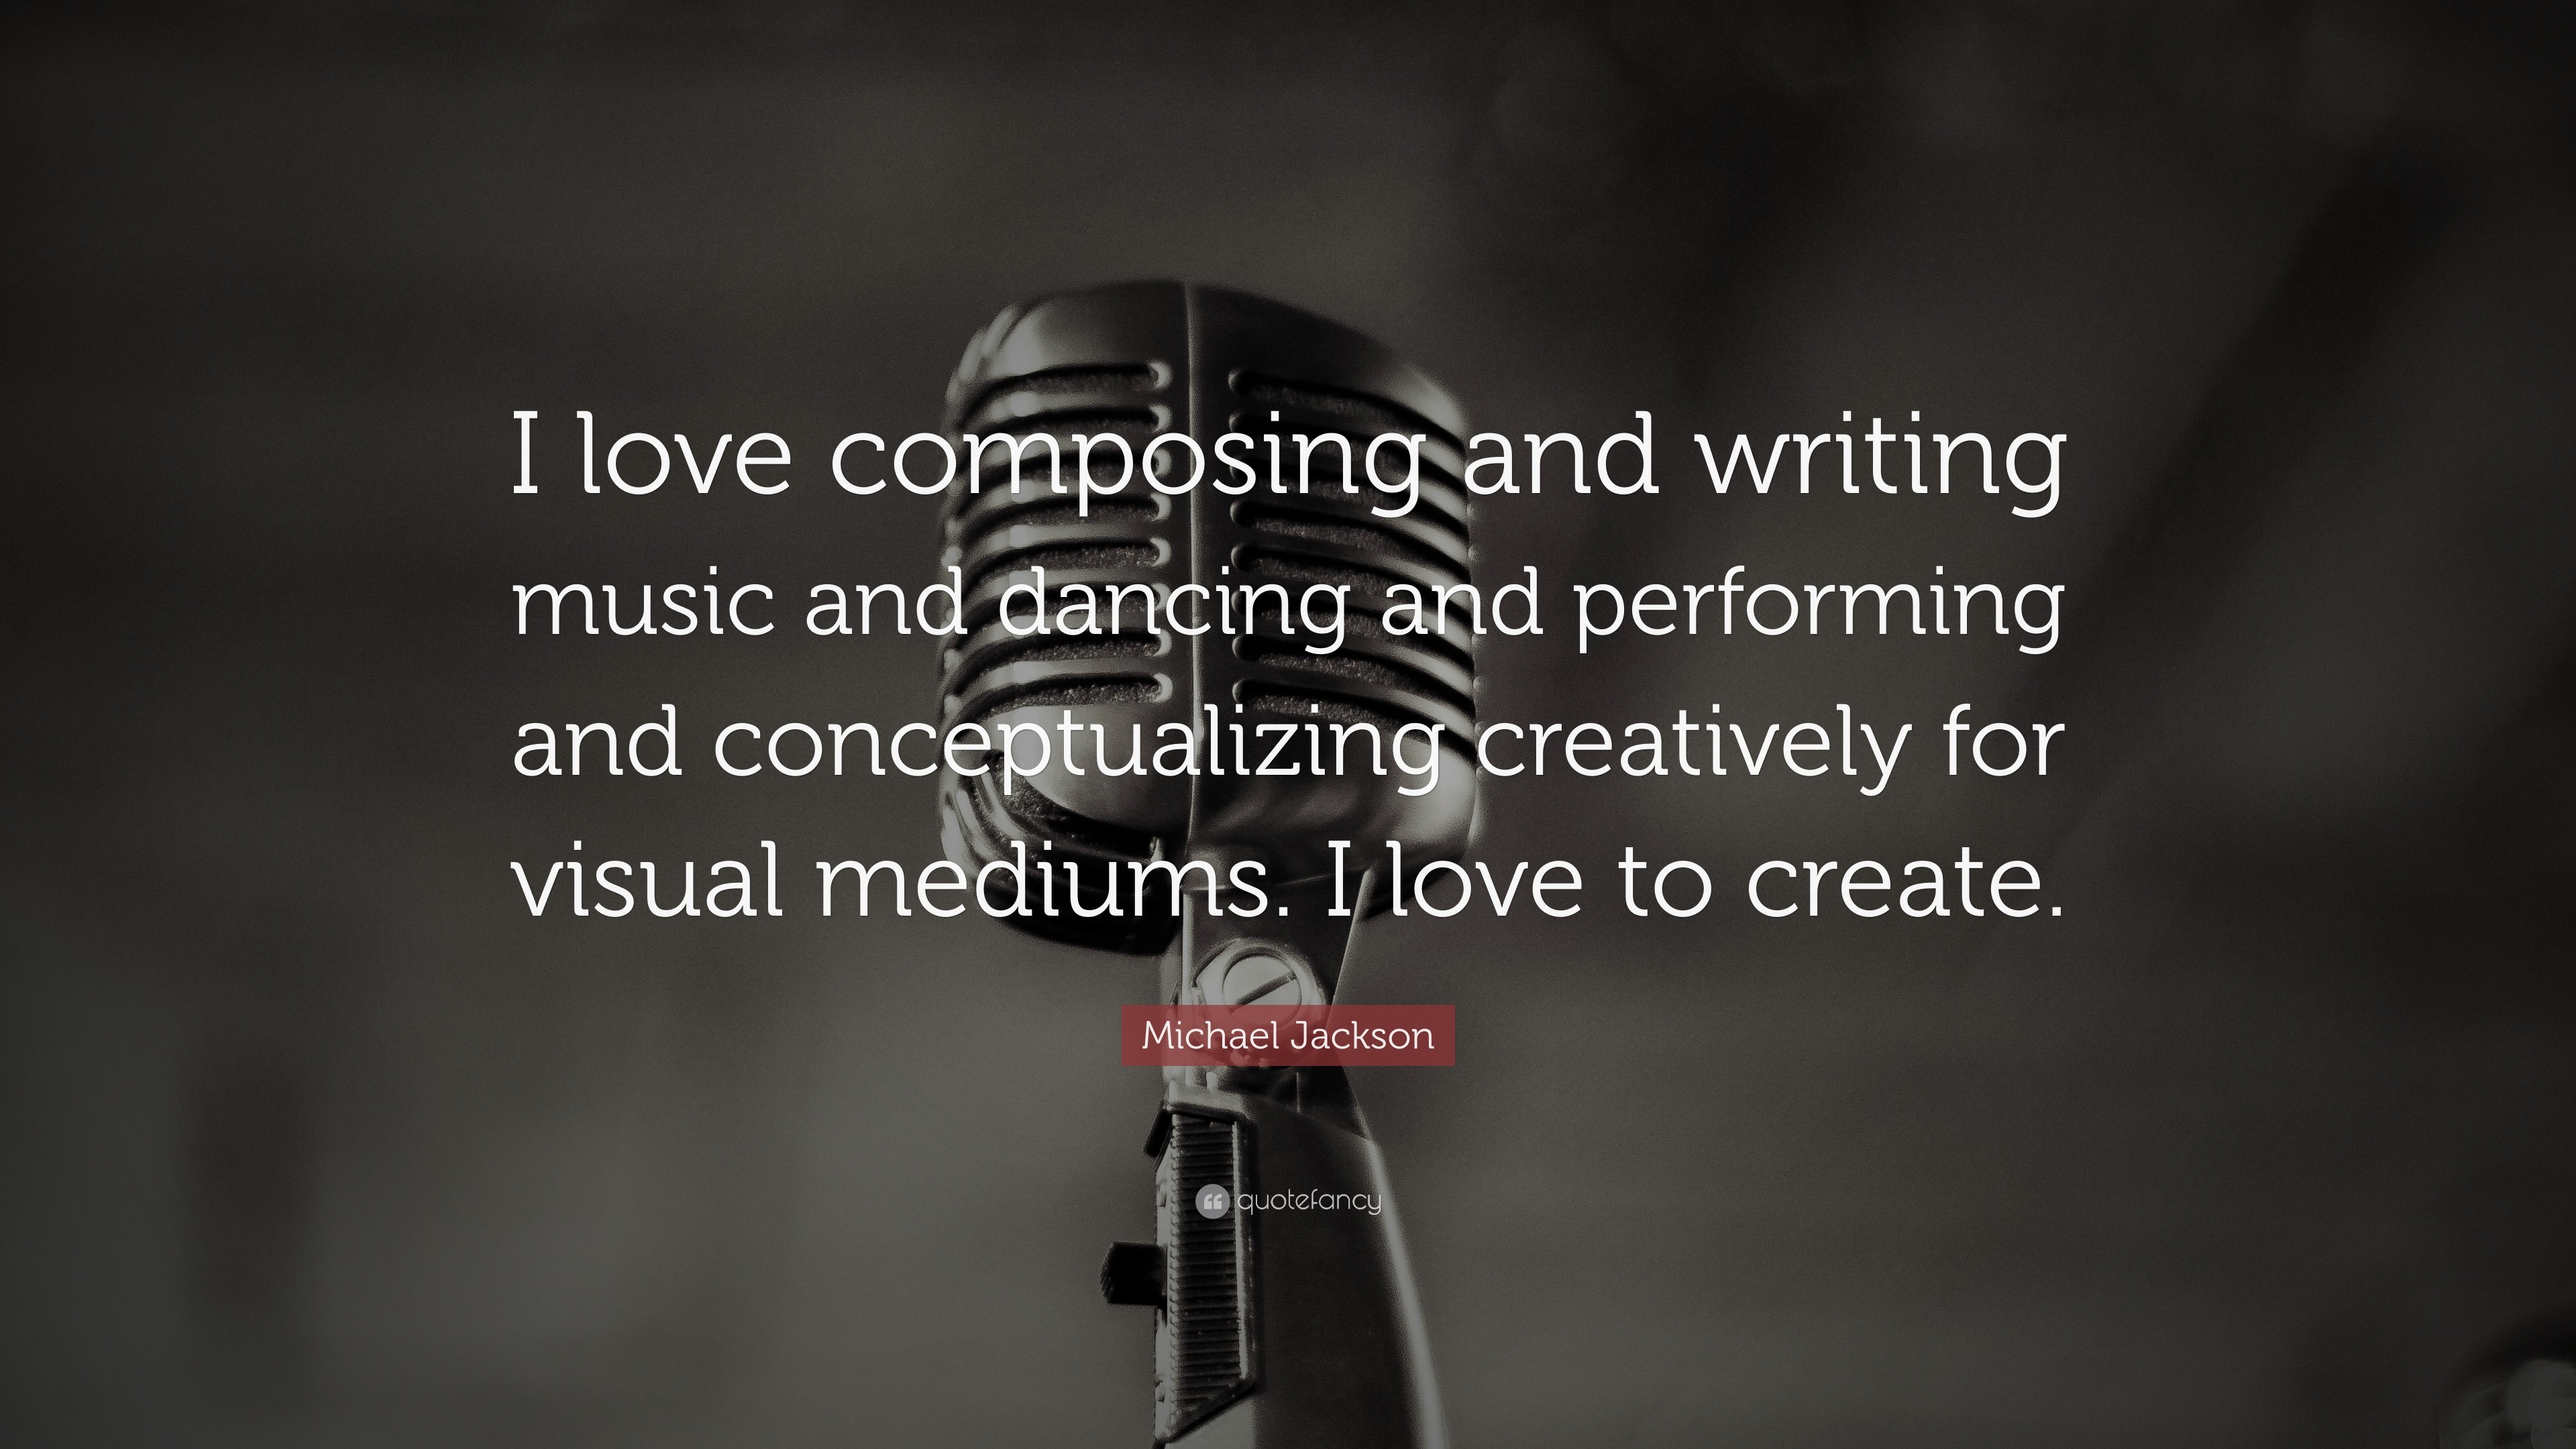 3840x2160 Michael Jackson Quote: “I love composing and writing music and dancing and  performing and